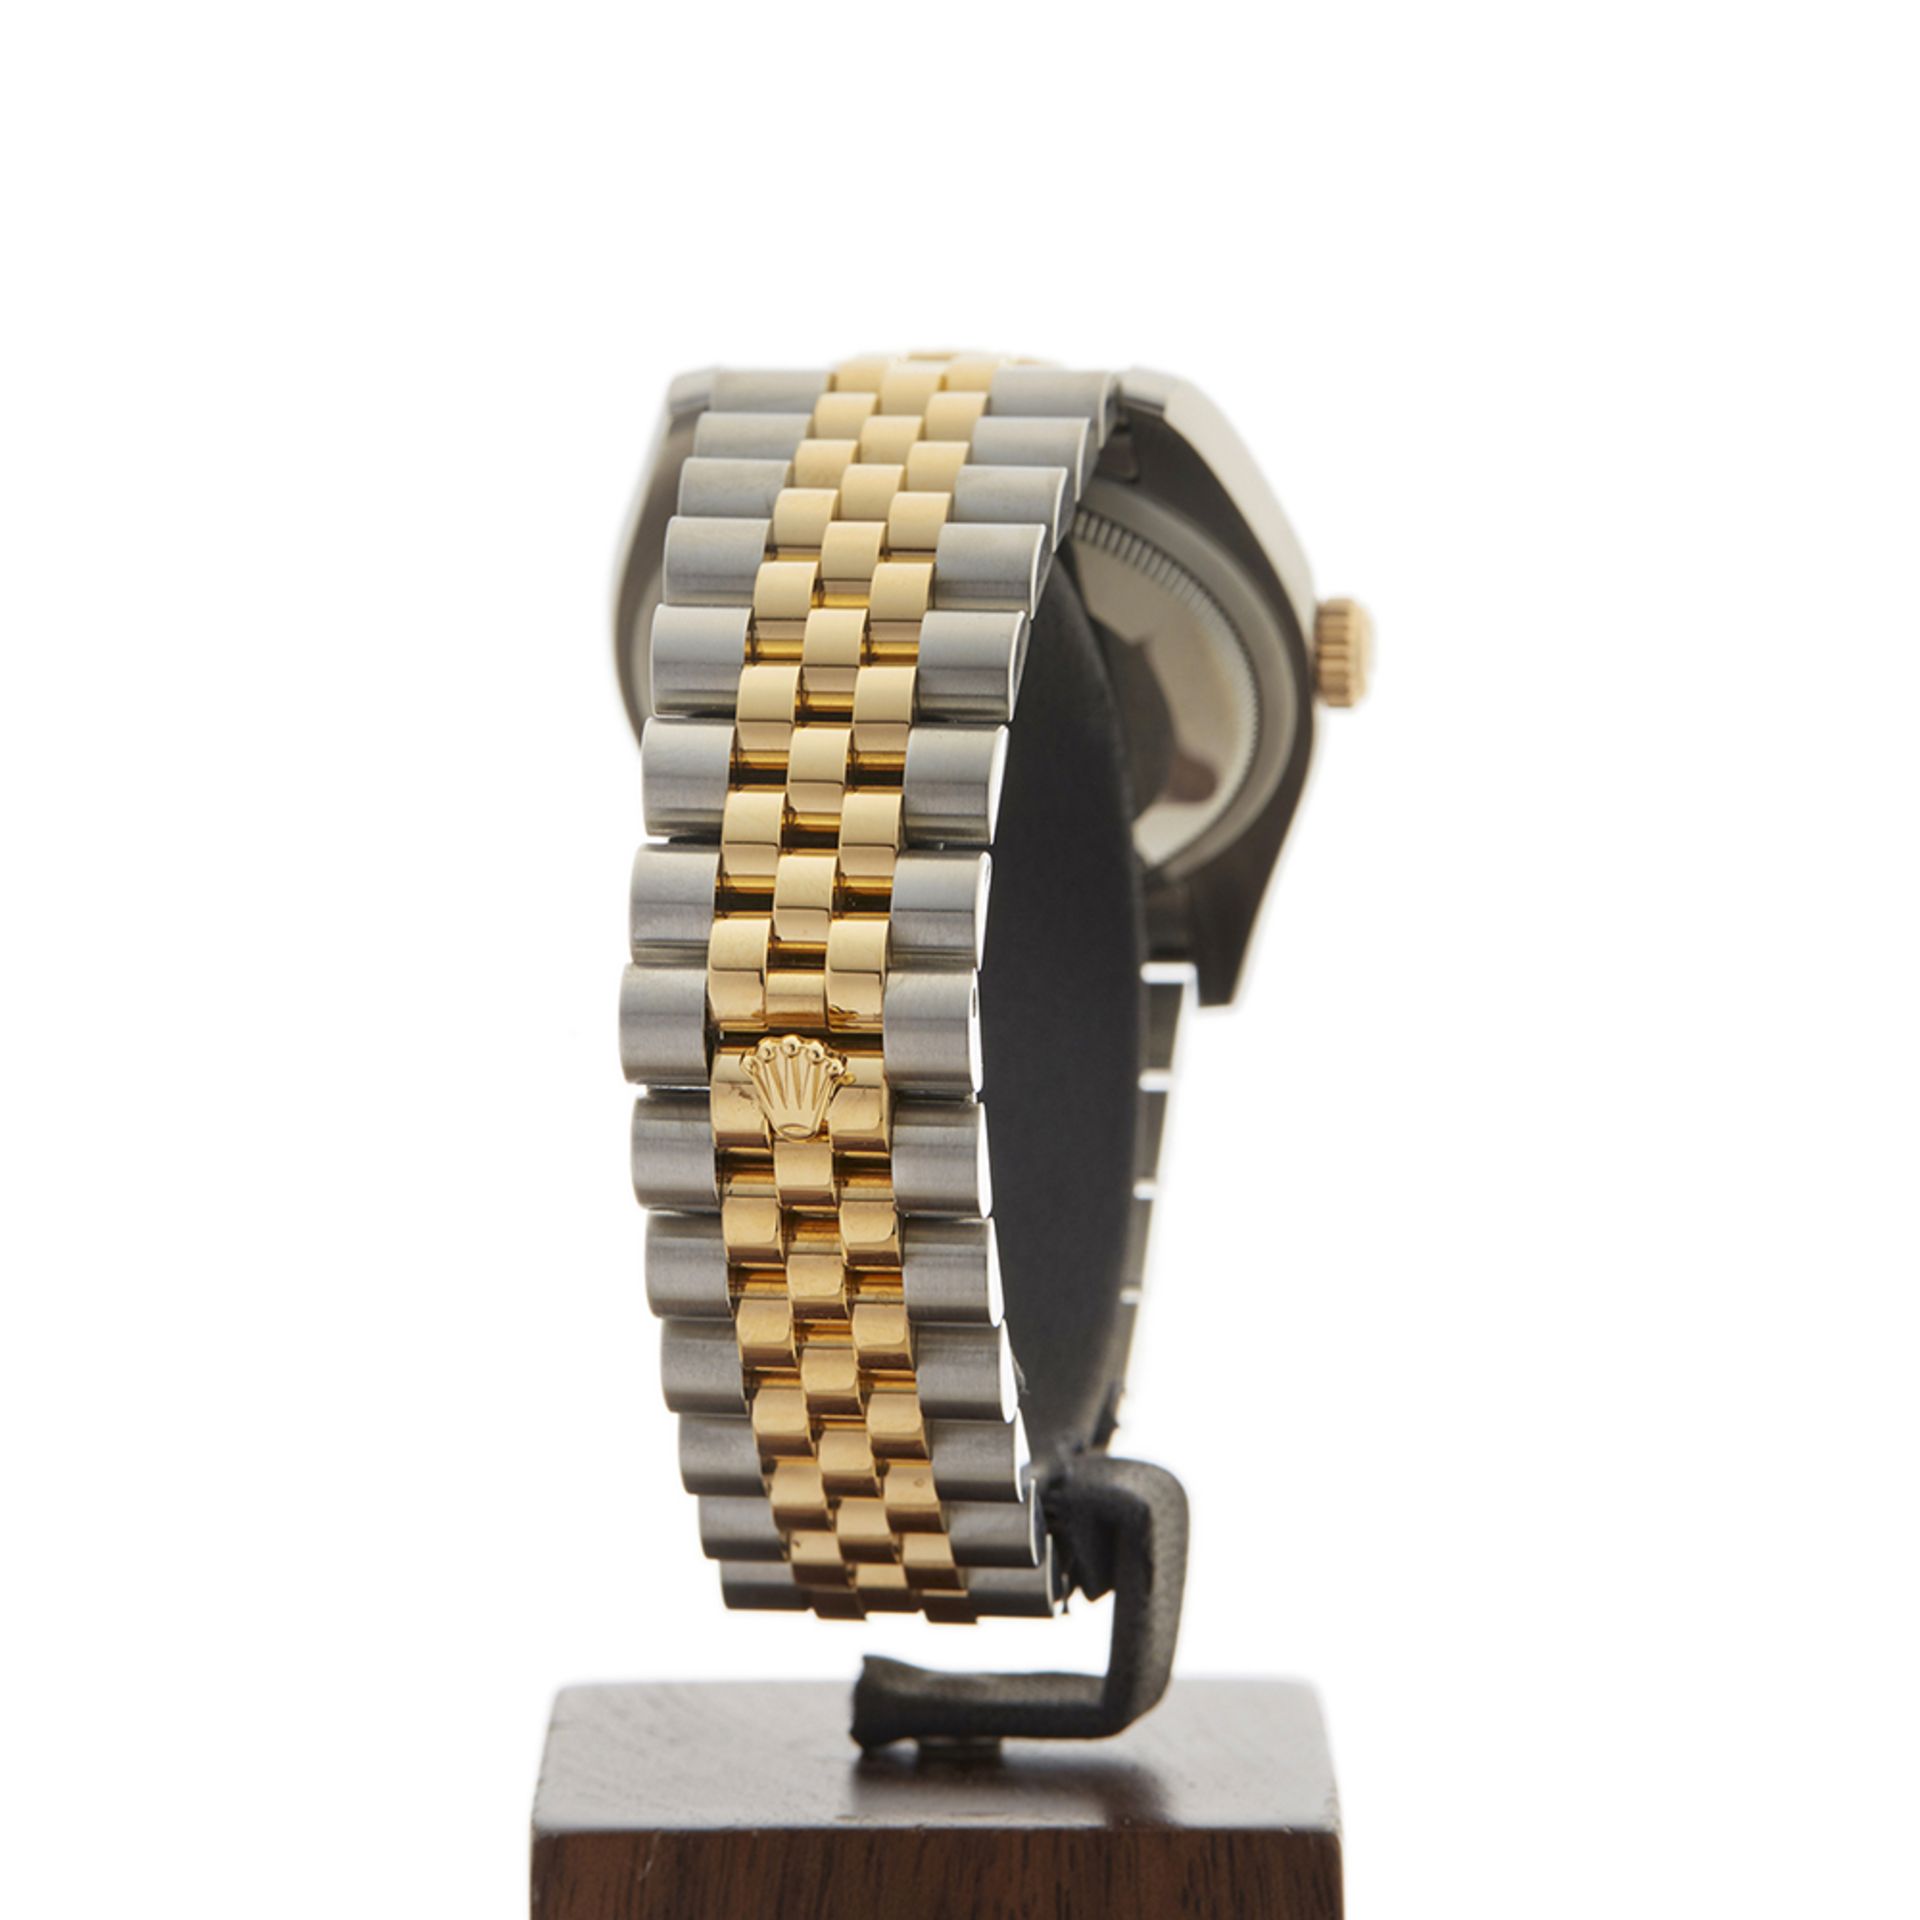 Datejust 36mm Stainless Steel & 18k Yellow Gold - 116233 - Image 7 of 9